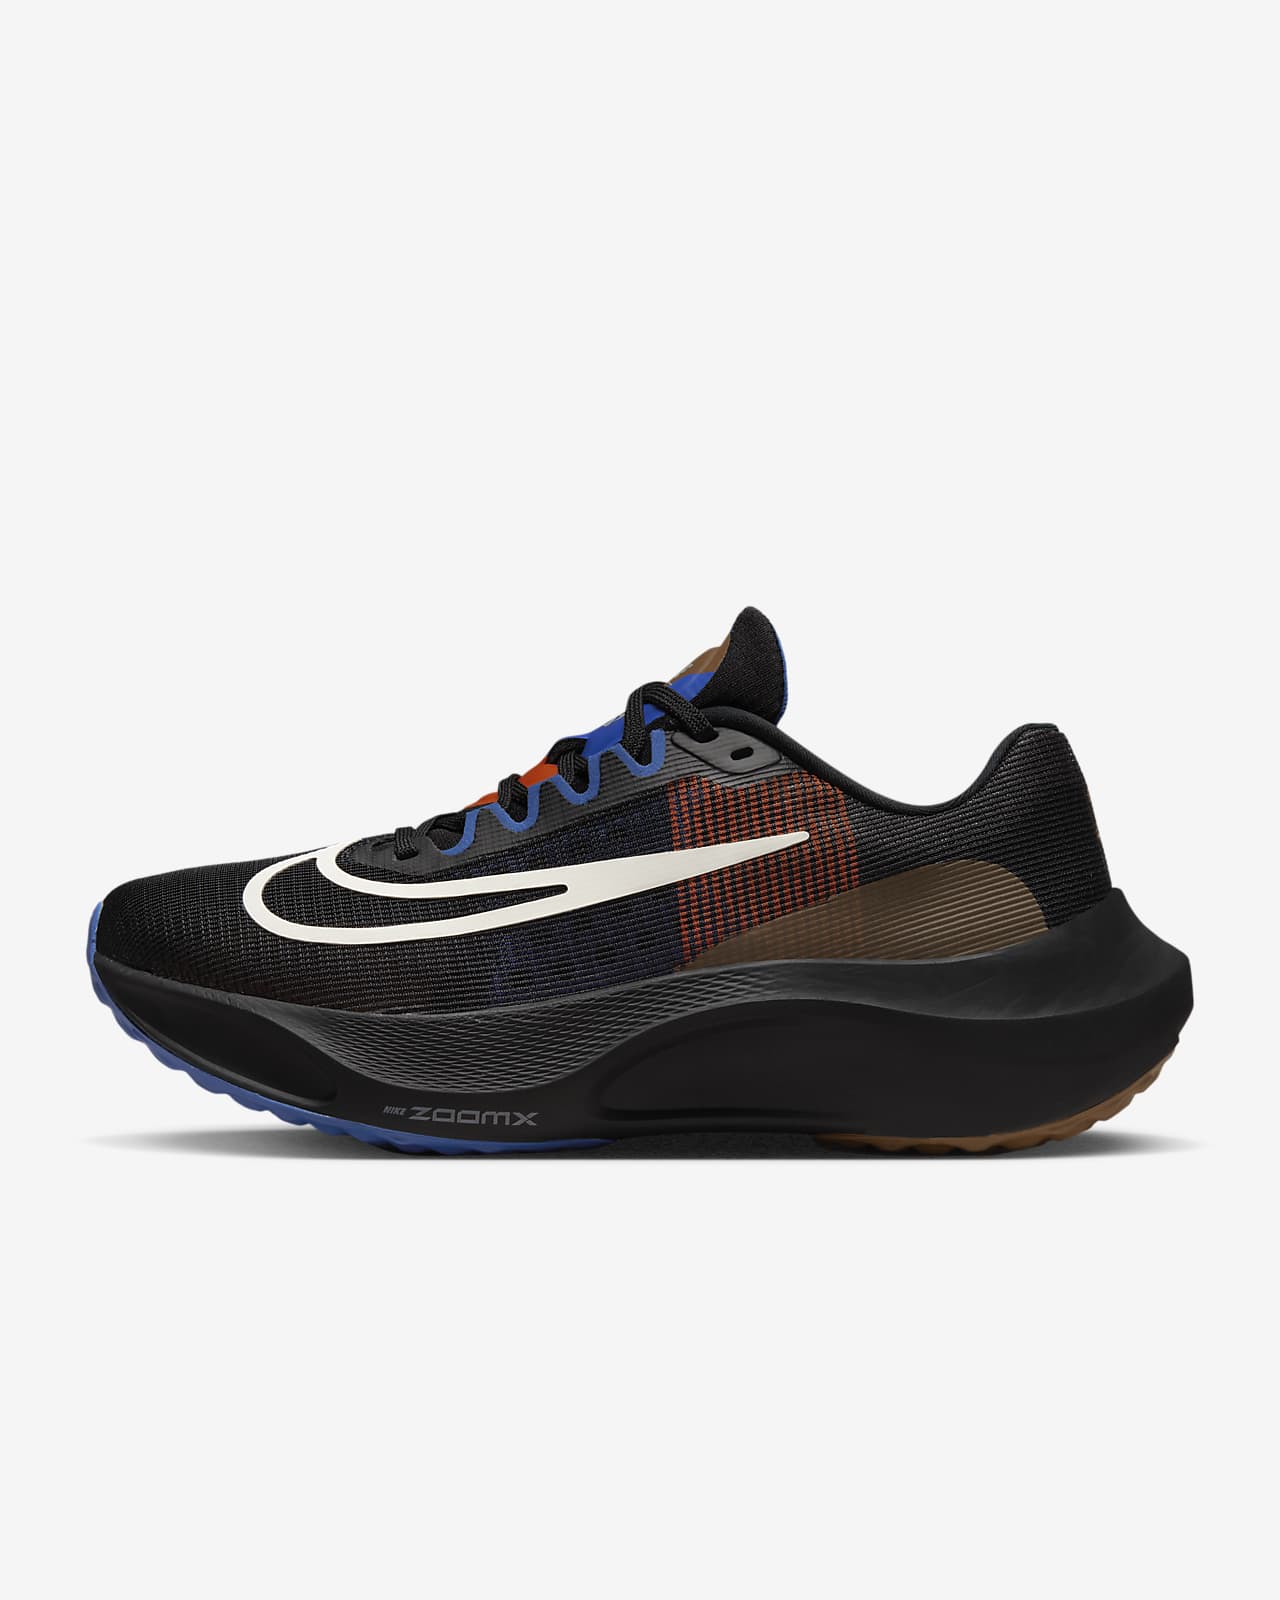 Chaussure de running sur route Nike Zoom Fly 5 A.I.R. Hola Lou pour Homme